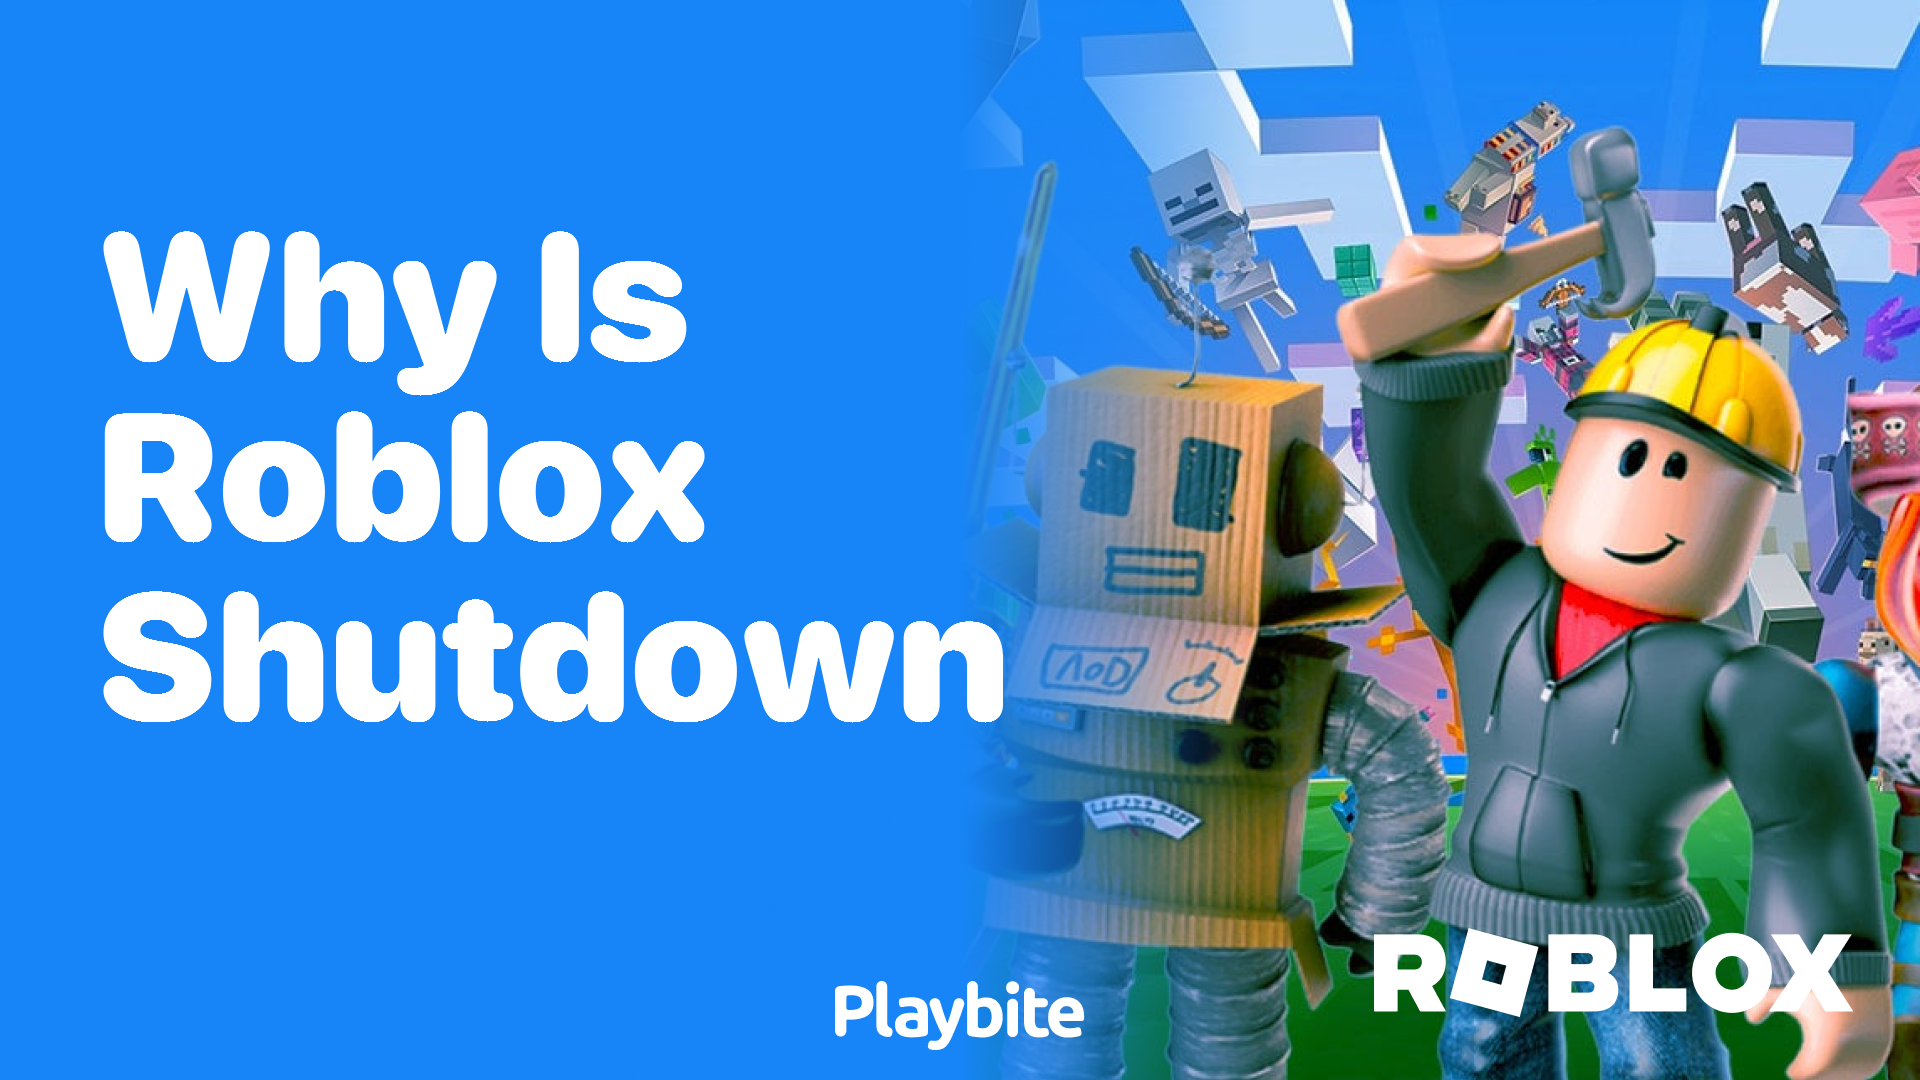 Why is Roblox Shutdown? Find Out the Real Reason